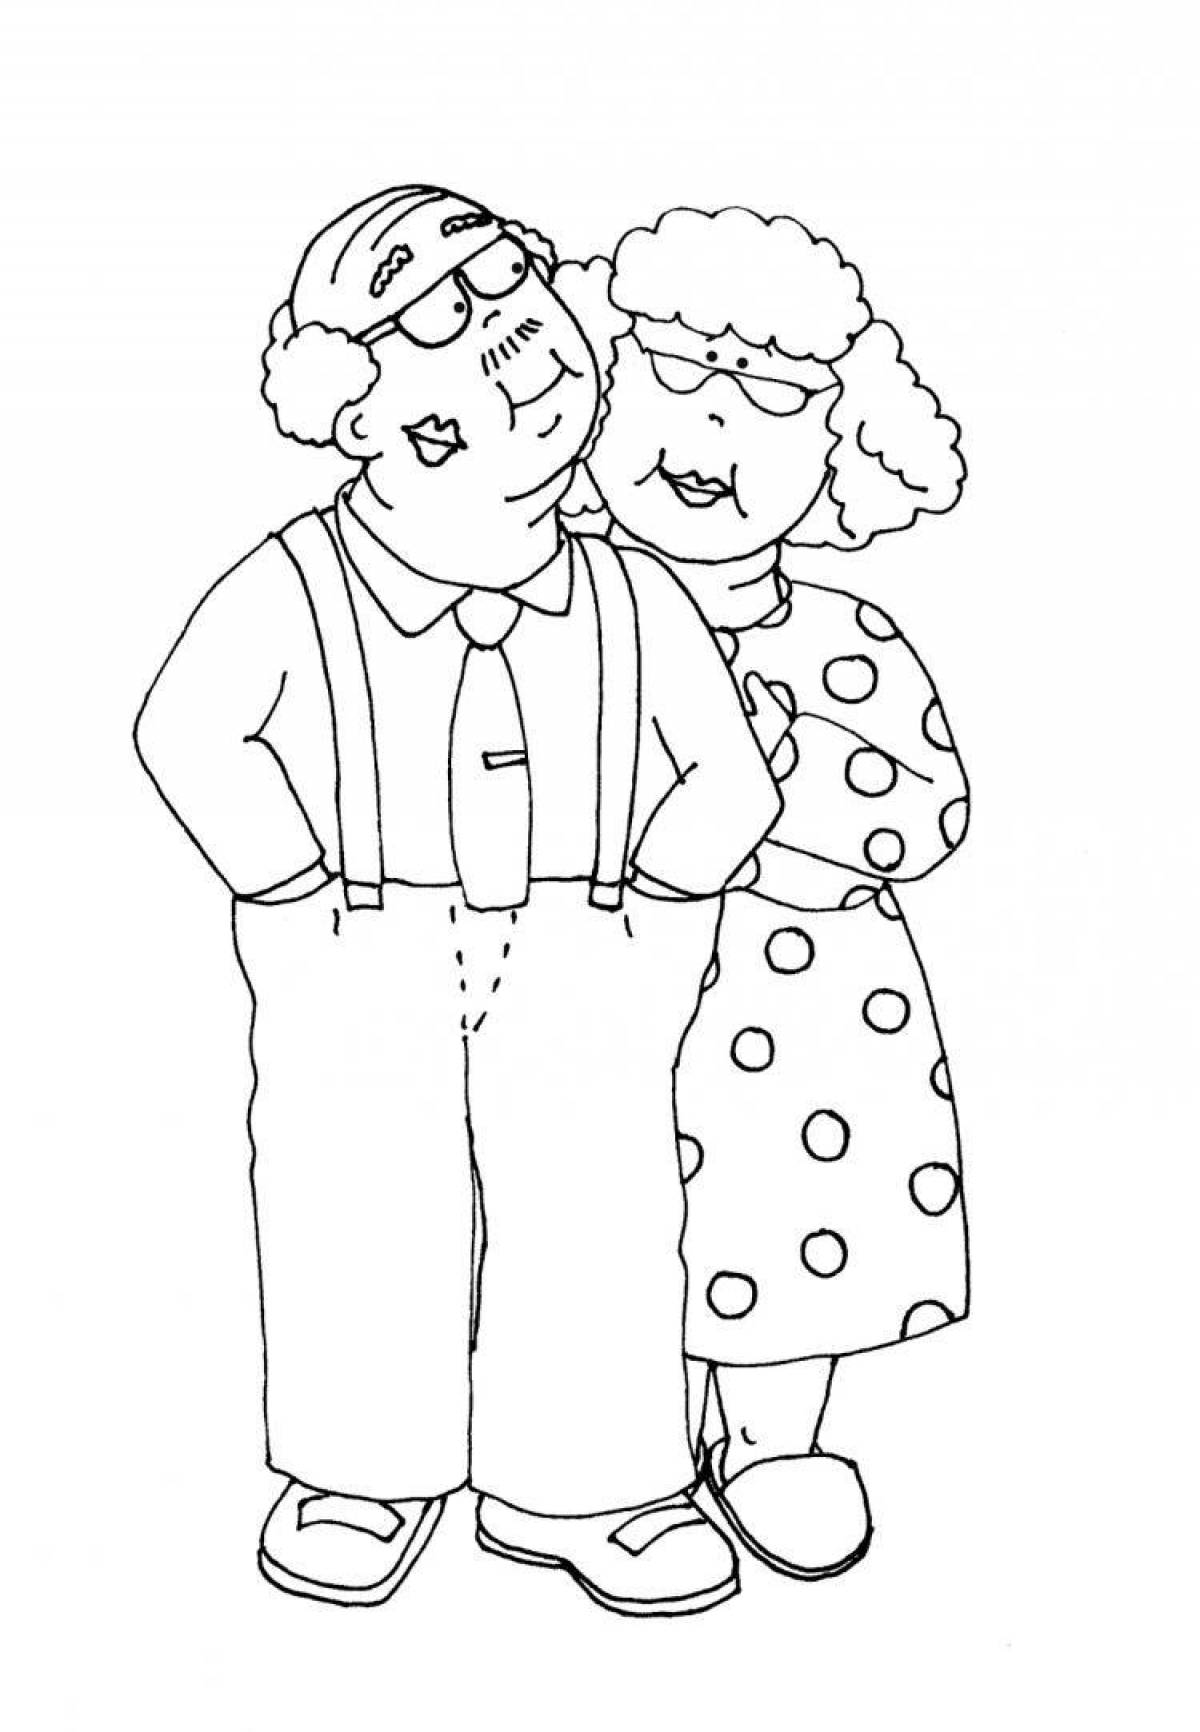 Gracious grandparents coloring pages for kids